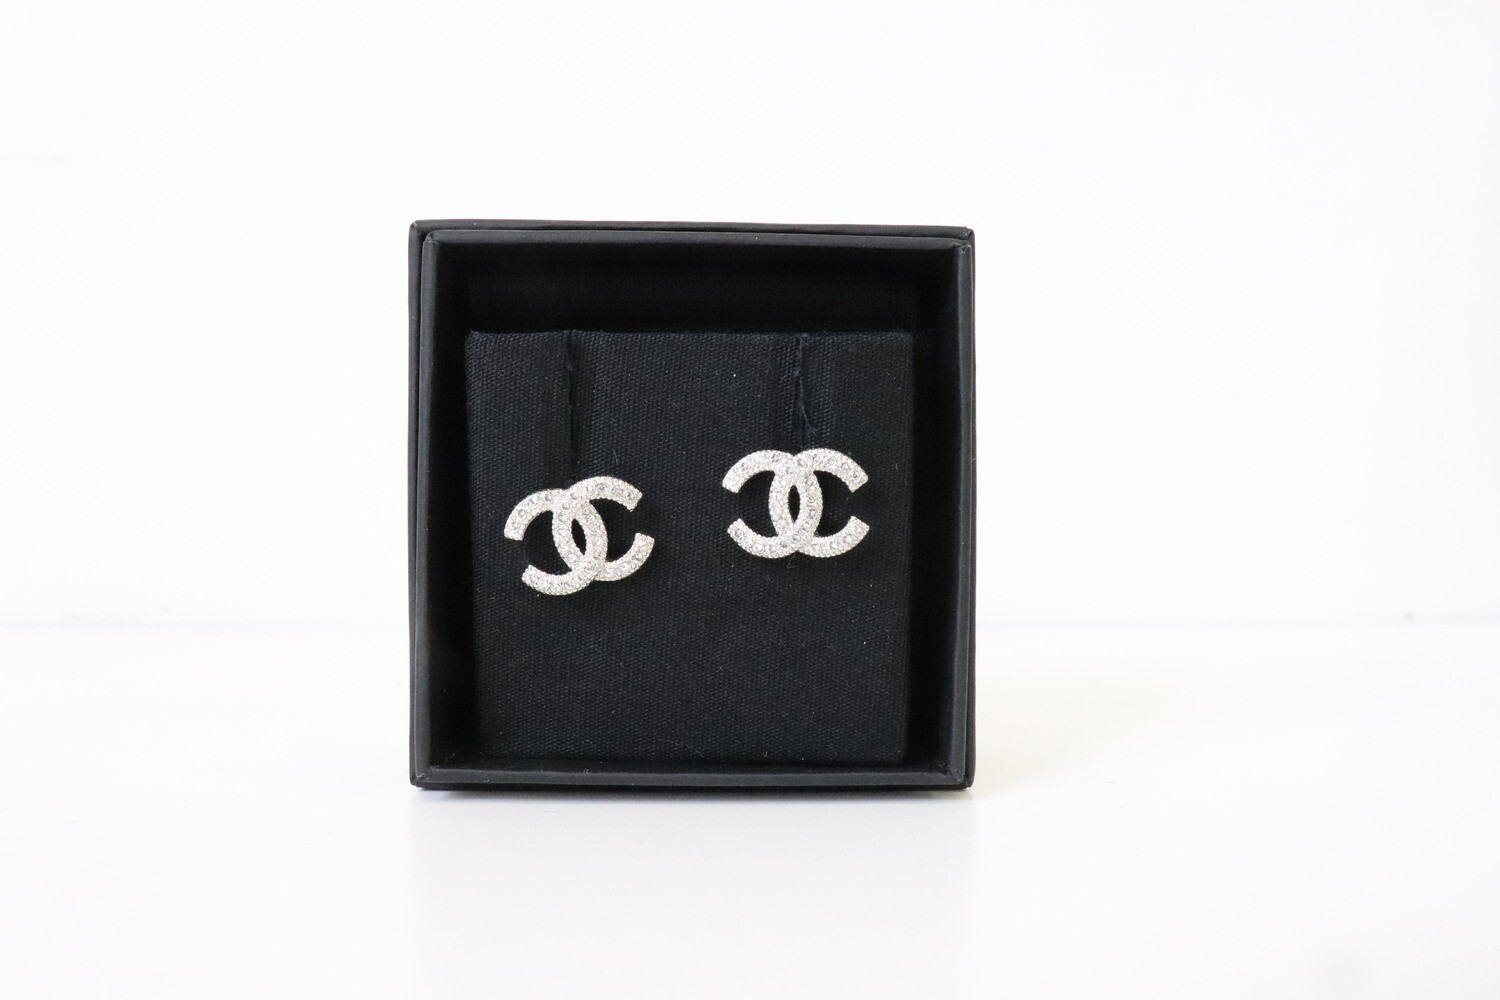 Chanel CC Drop Heart Earrings in Gold with Pearl and Rhinstones, New in Box  GA002 - Julia Rose Boston